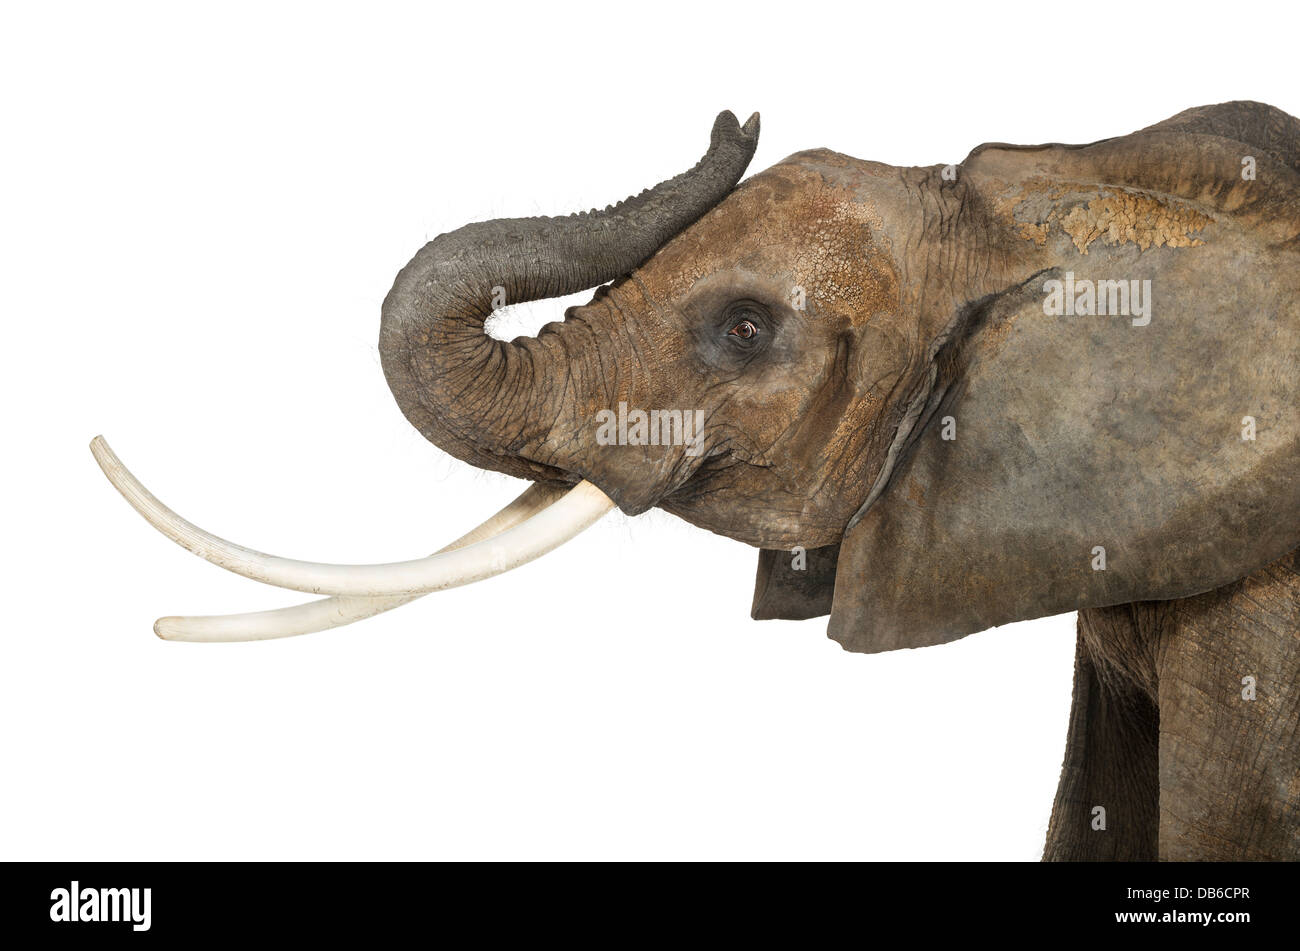 Close up of an African Elephant, Loxodonta africana, lifting its trunk against white background Stock Photo